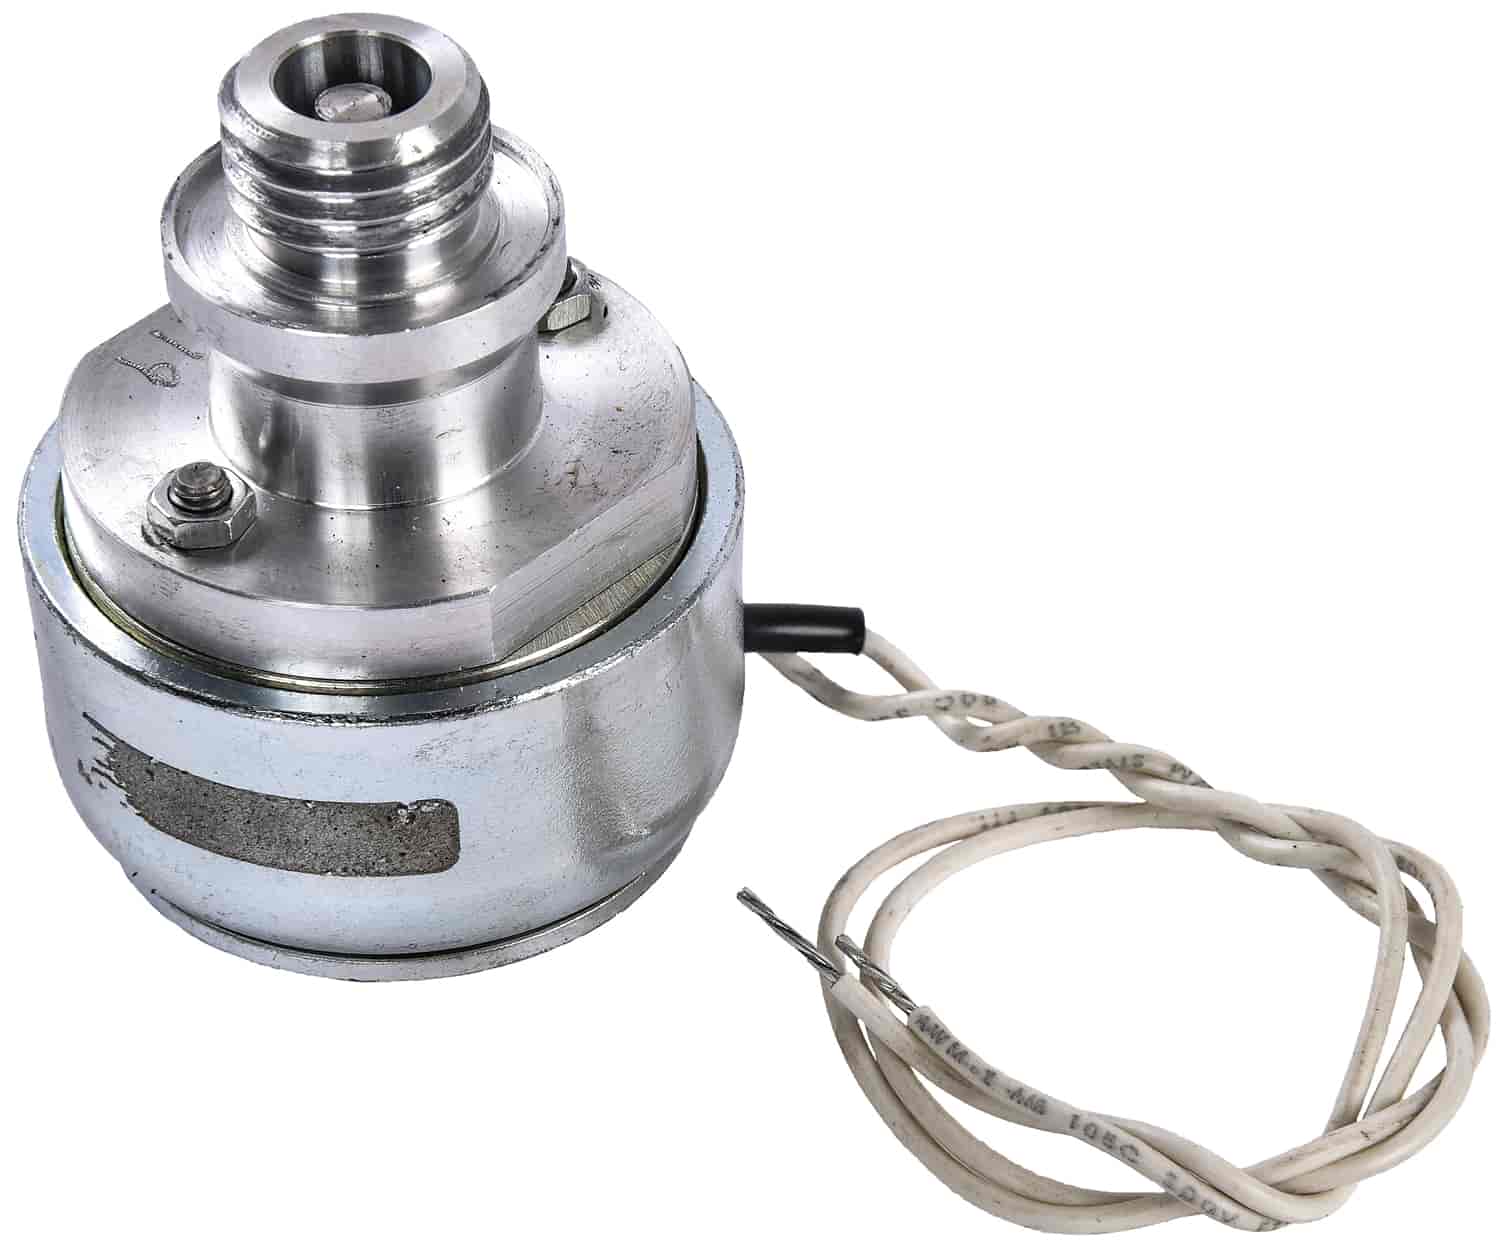 Trans-Brake Solenoid Replacement for GM TH400